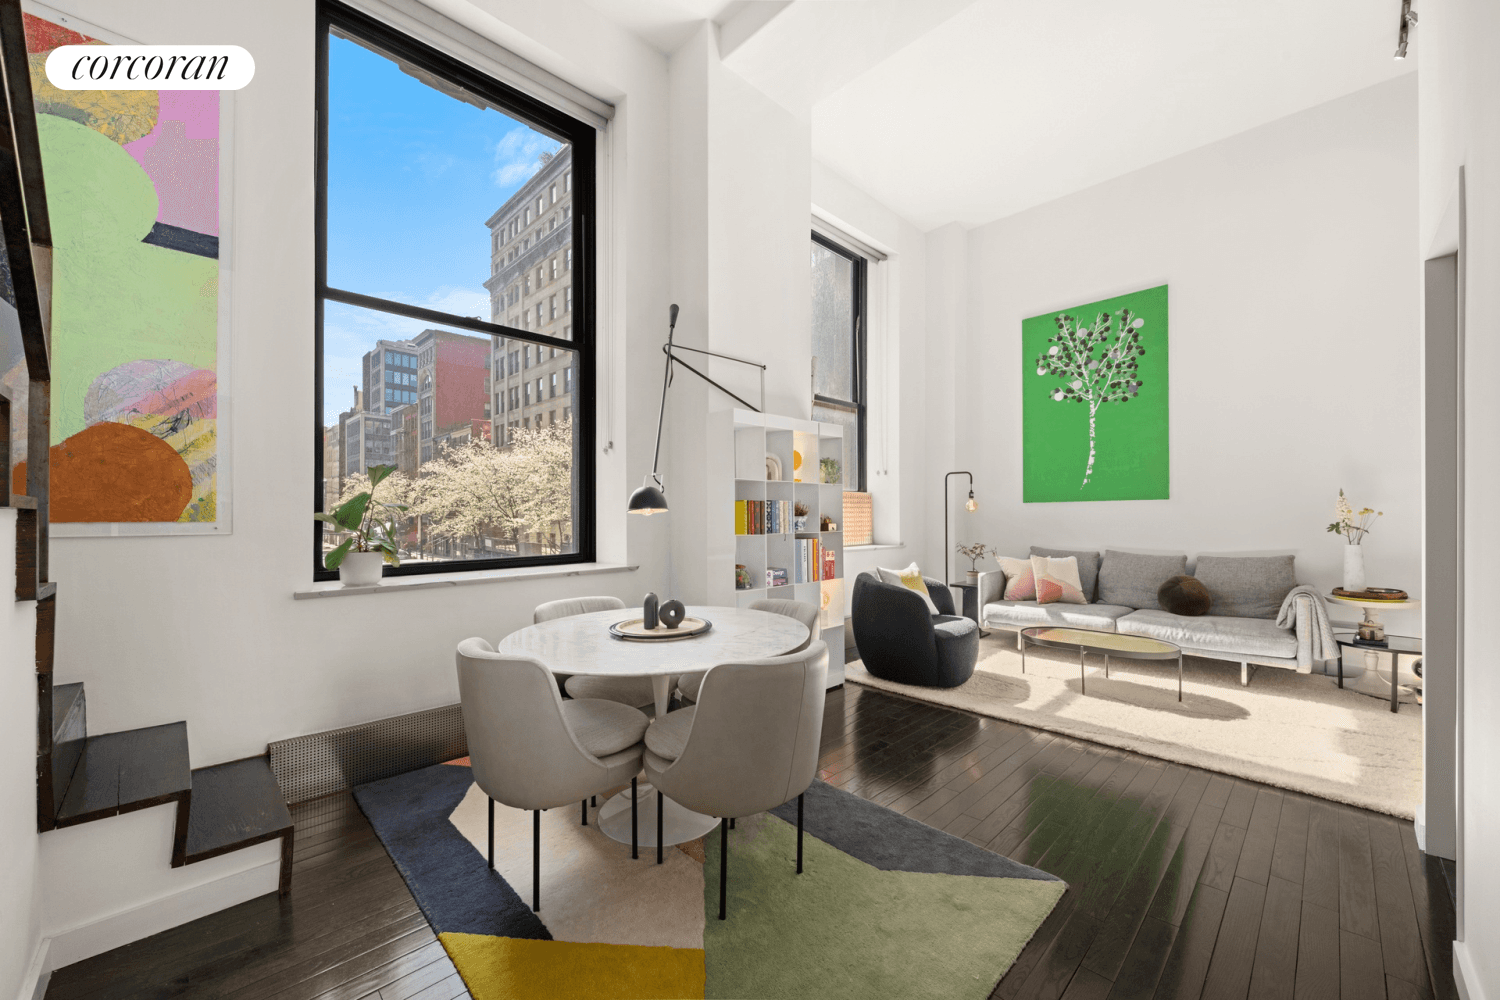 XXX Mint Greenwich Village Pre War Loft with 14ft CeilingsThe one you've been waiting for Apartment D201 is a chic, stylish, meticulously renovated Downtown loft that couples stunning interior design ...